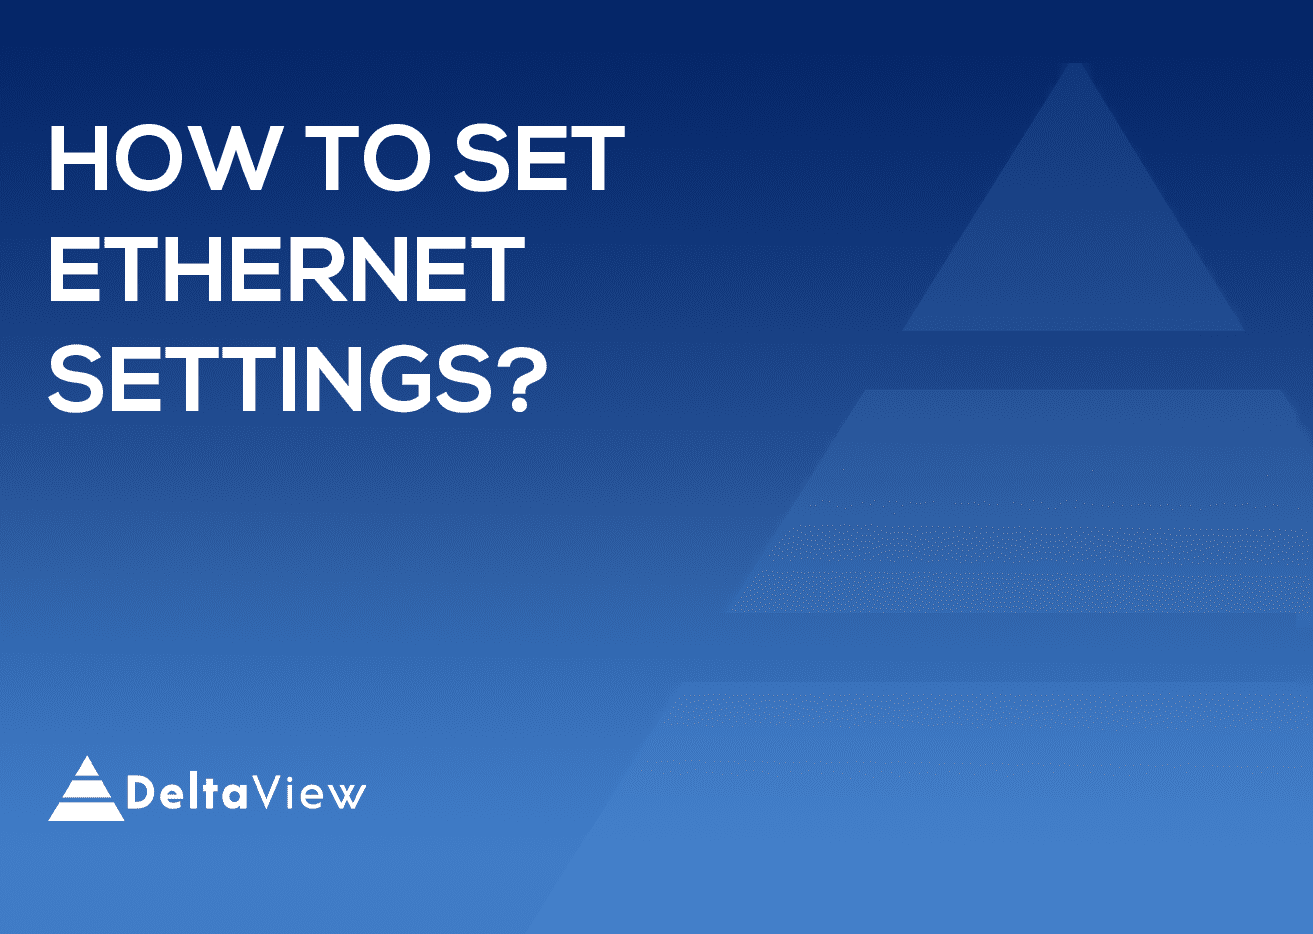 How to set Ethernet settings?